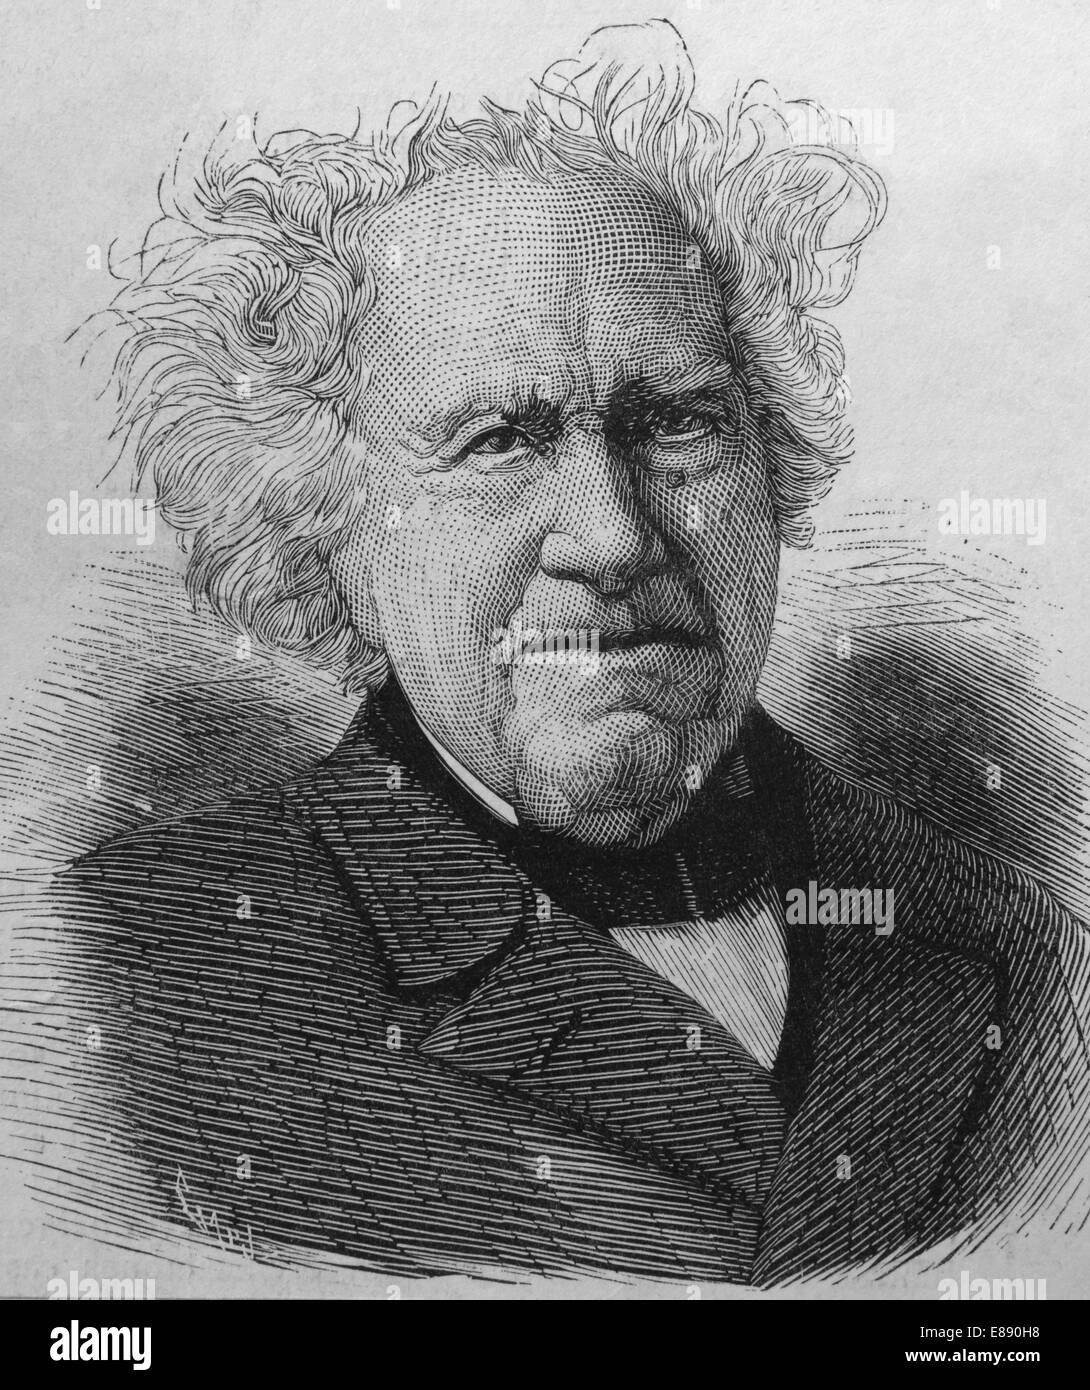 Michel Eugne Chevreul (1786 -1889). French chemist whose work with fatty acids led to early applications in the fields of art a Stock Photo